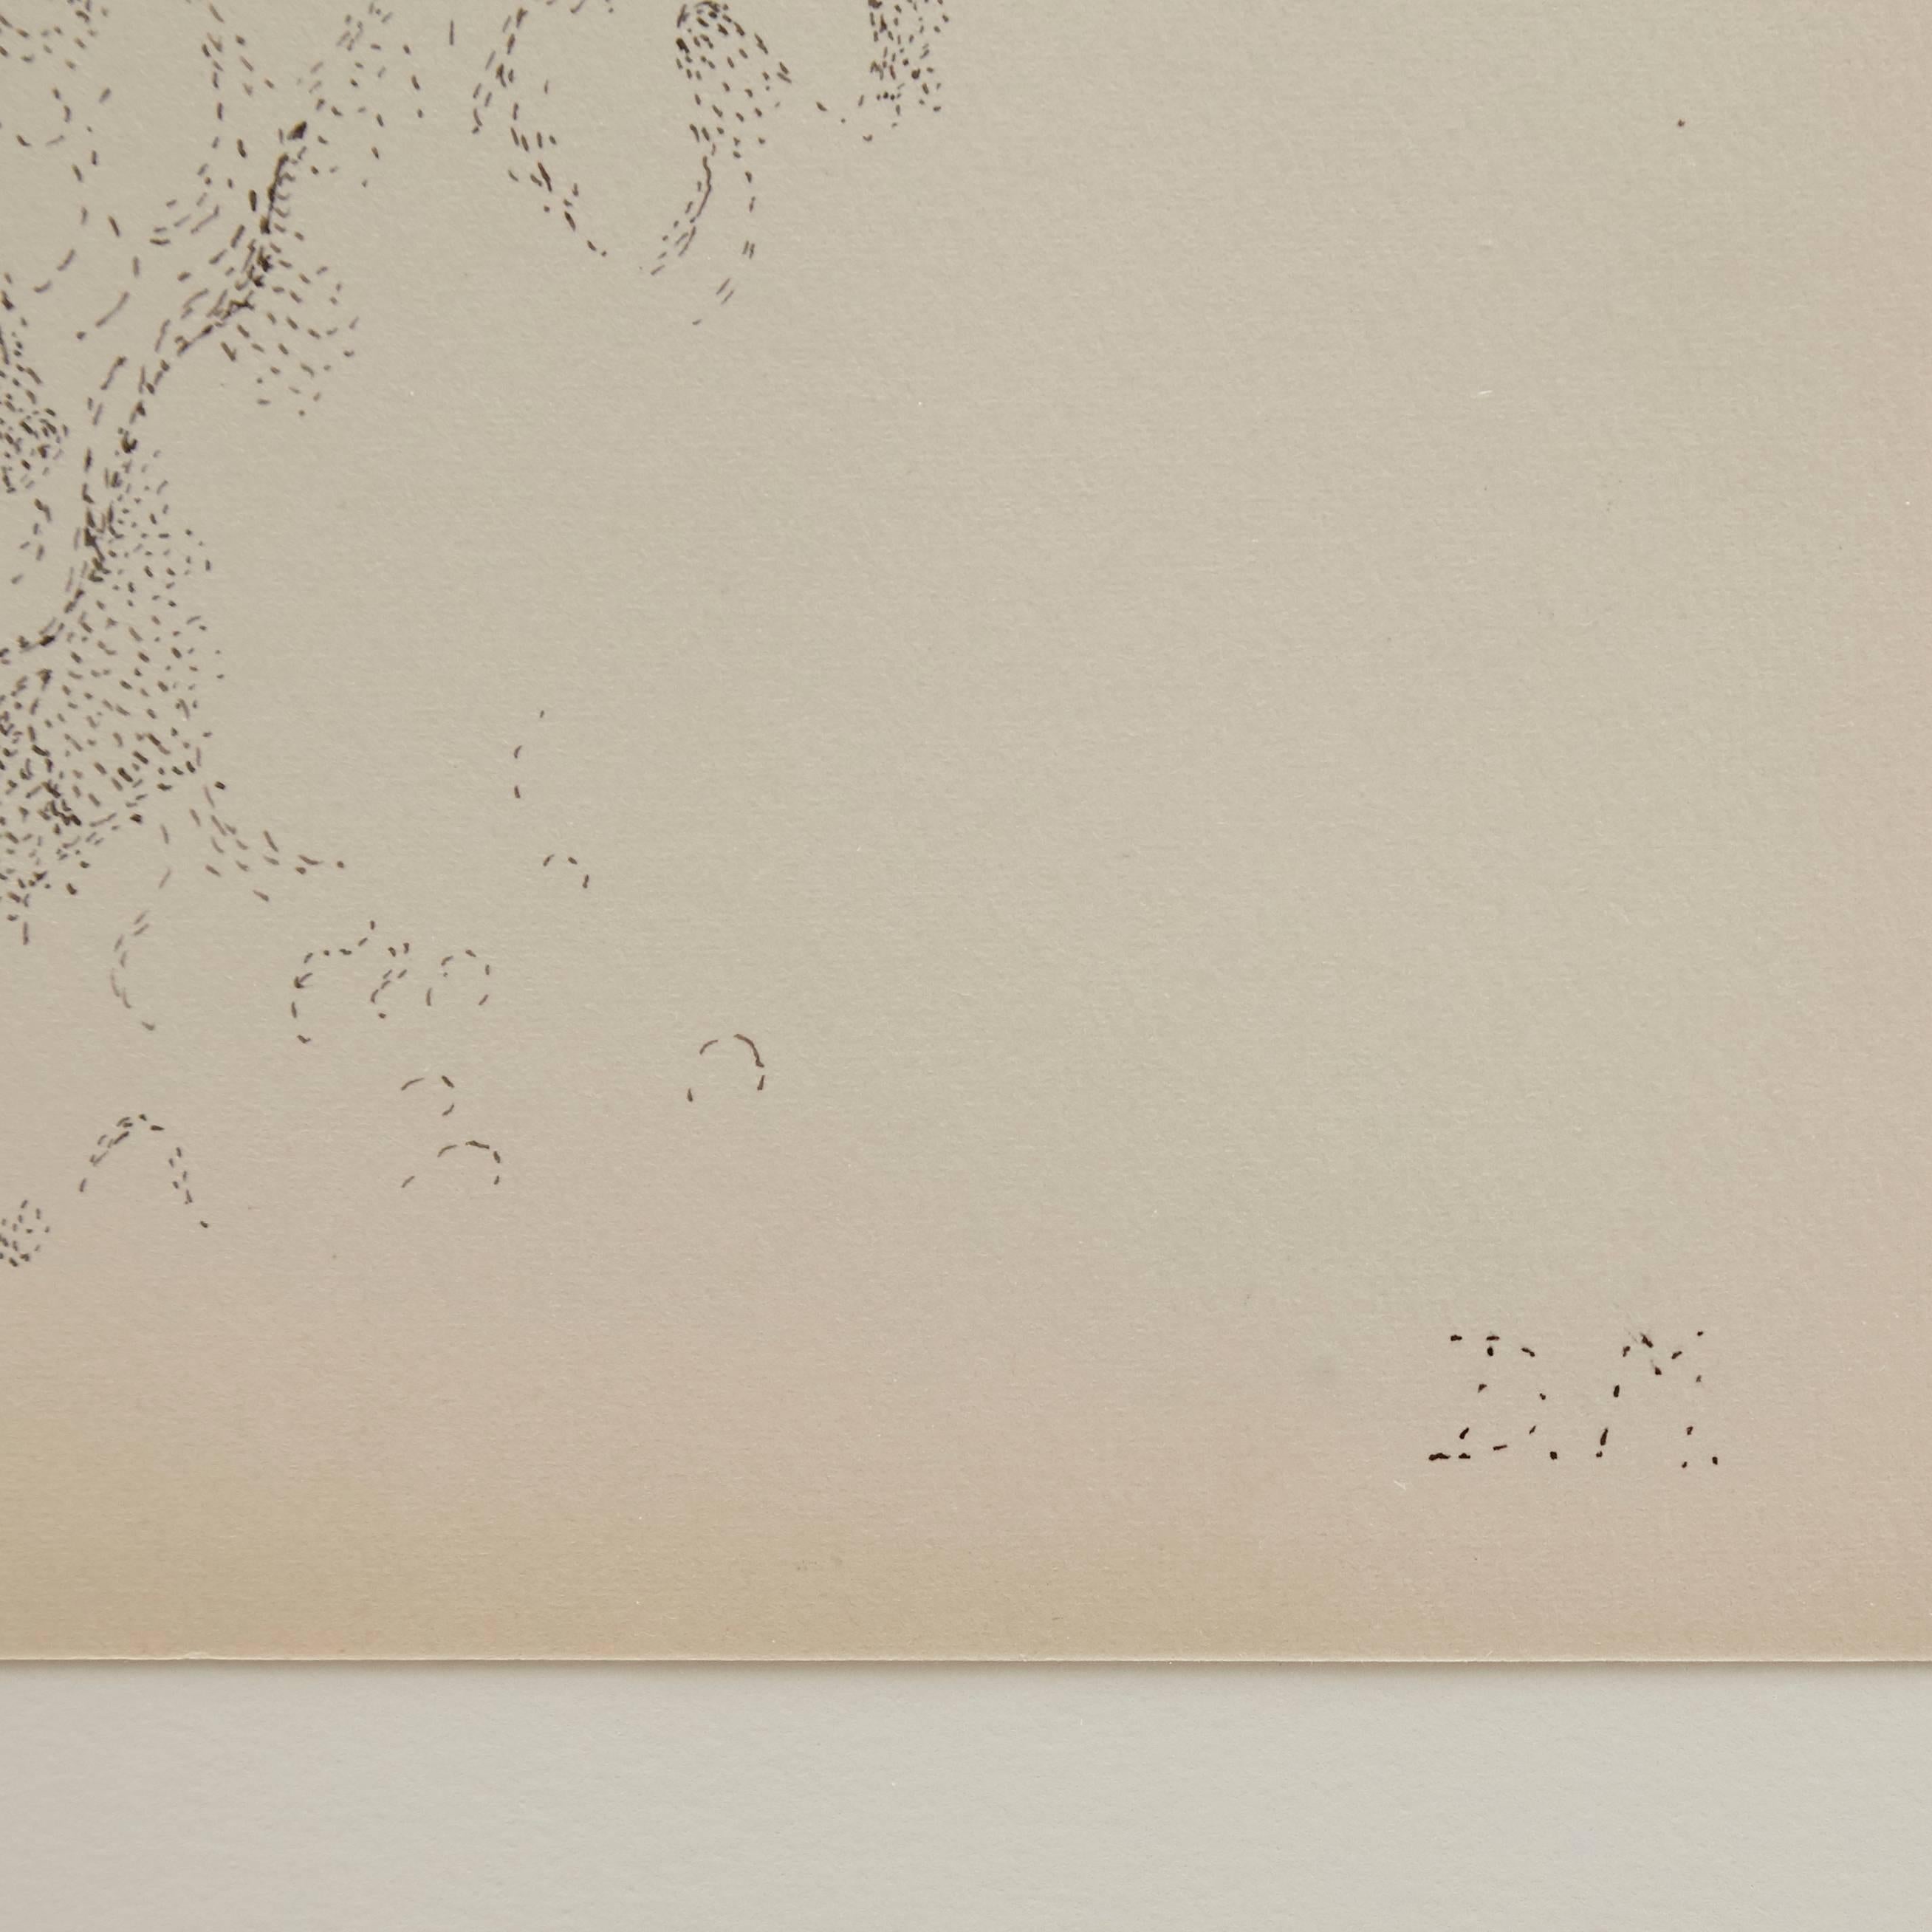 French Pointillist Drawing on Paper by Dora Maar